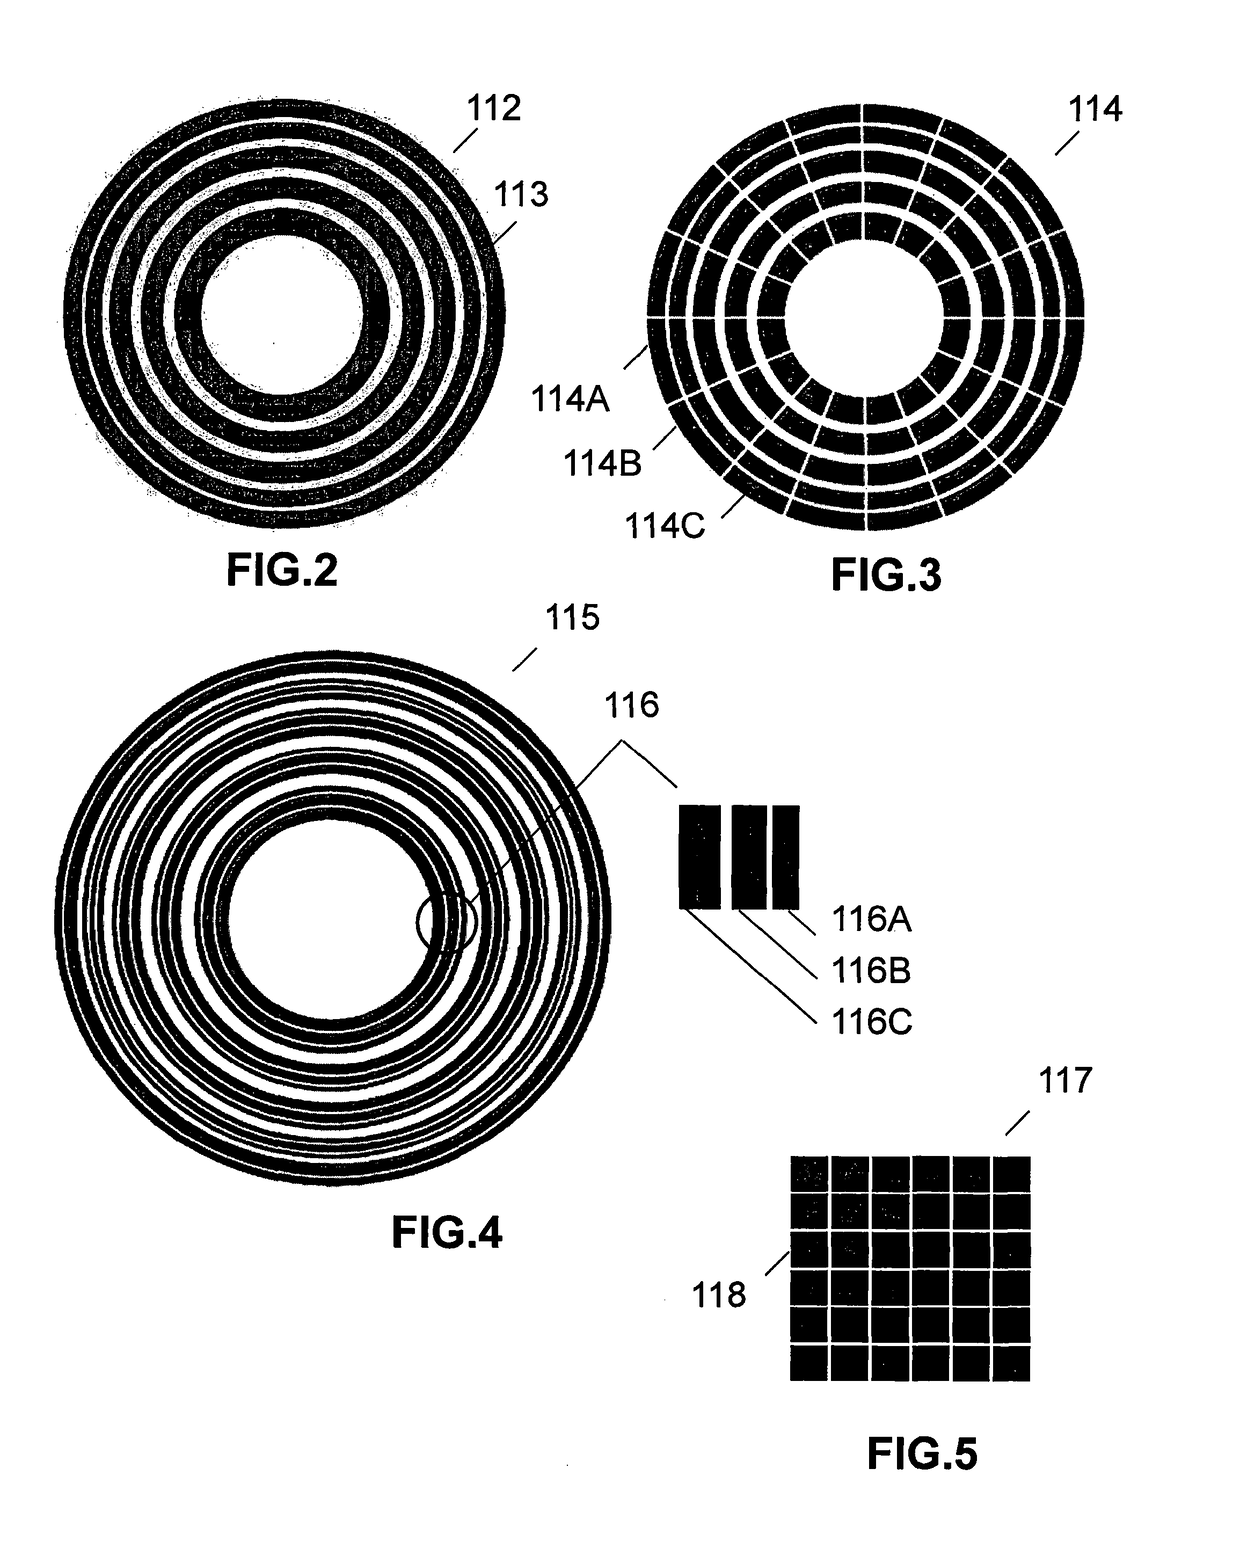 Electrically focus-tunable lens